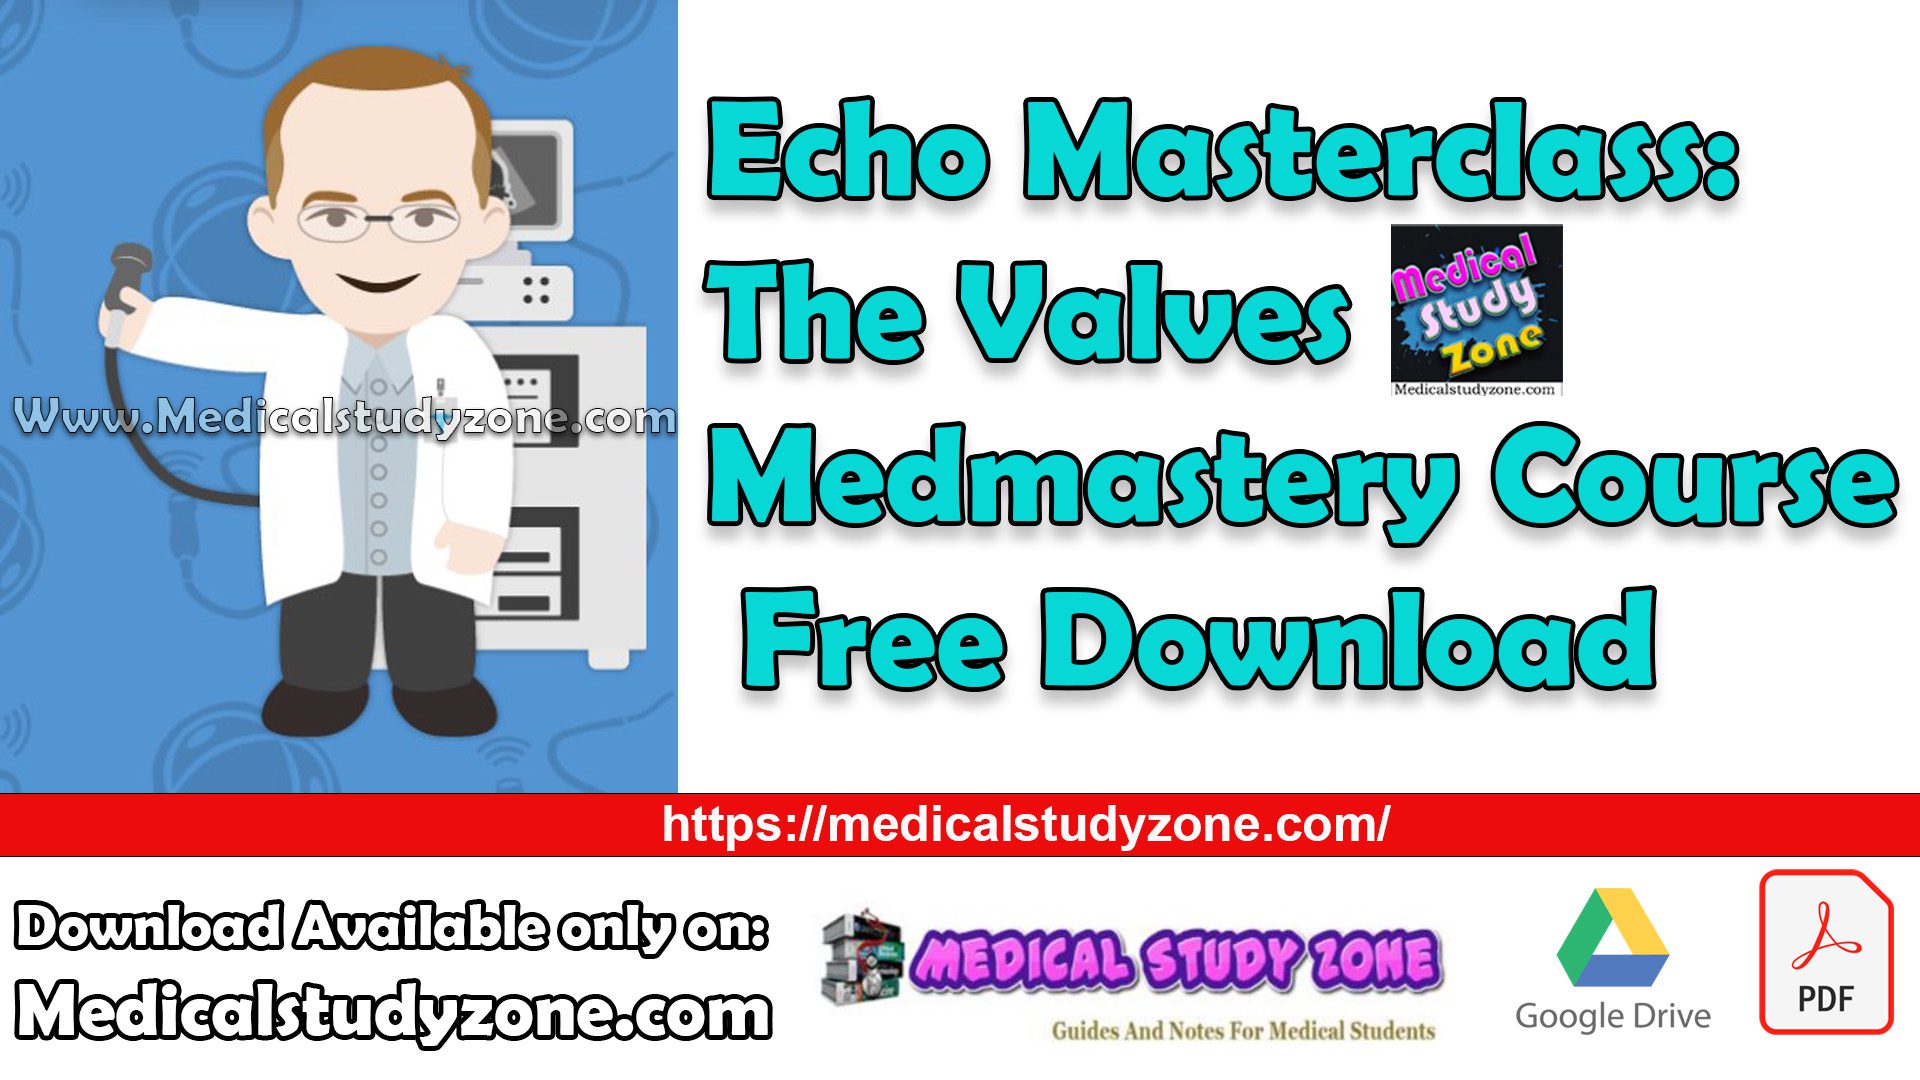 Echo Masterclass: The Valves Medmastery Course Free Download